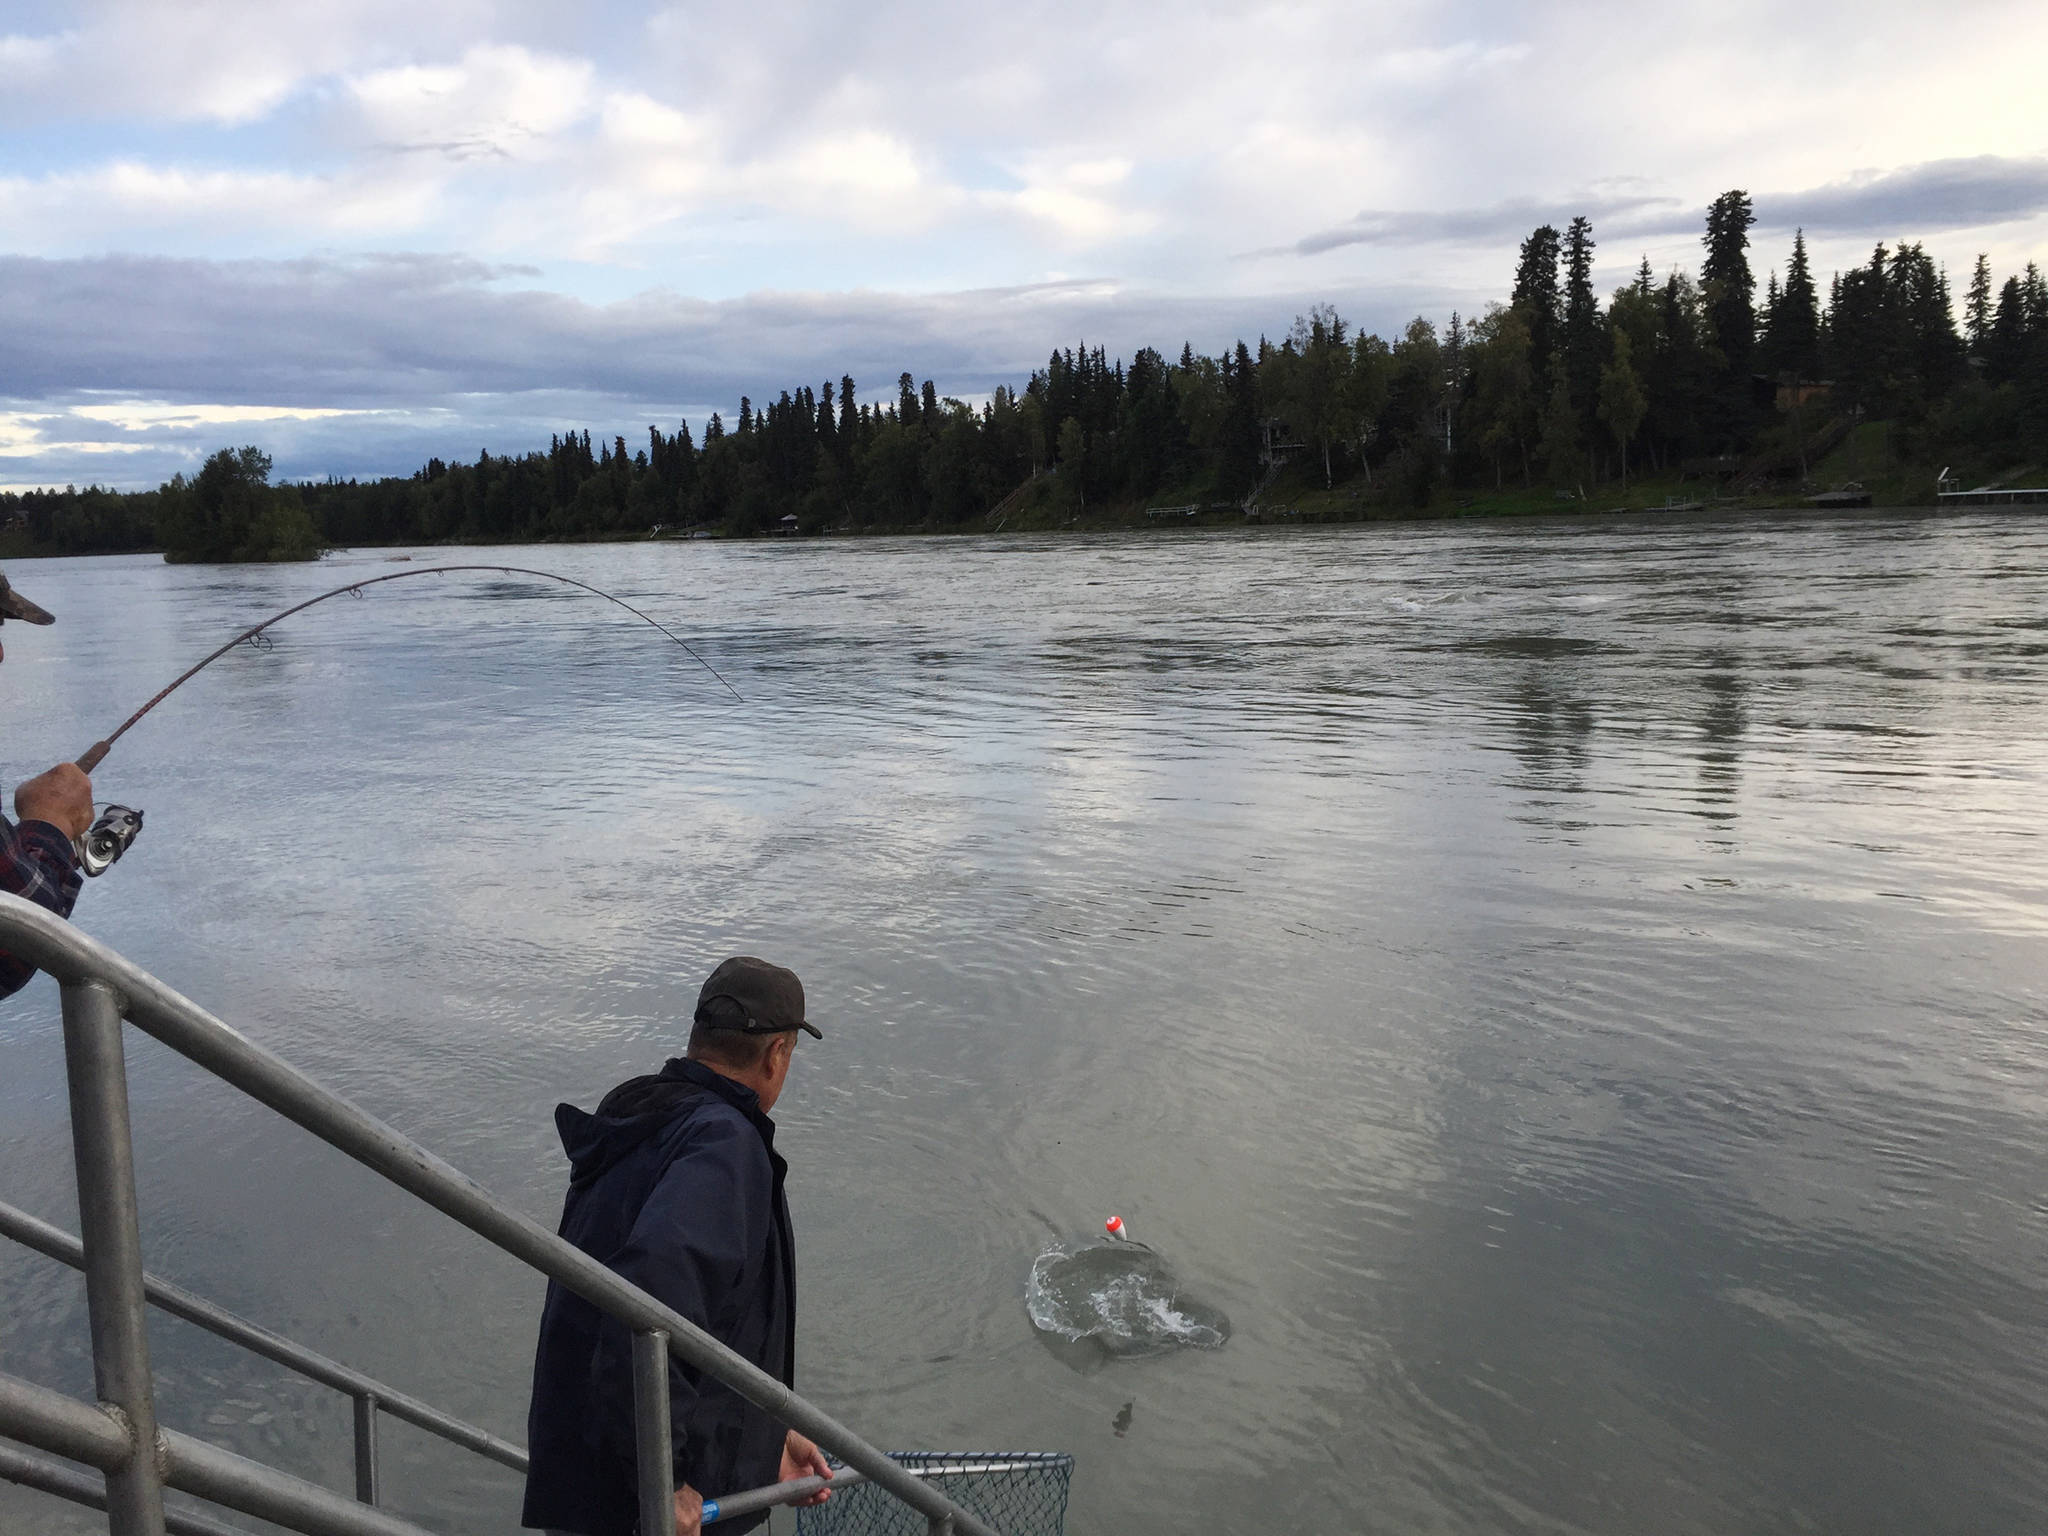 Two anglers work together to land a silver salmon from the steps on the fishing platform near the Soldotna Visitors Center on Wednesday, Aug. 30, 2017 in Soldotna, Alaska. The silver salmon fishing has been reportedly good throughout the Kenai River since early August, and silver salmon continue to enter the river throughout the fall. (Photo by Elizabeth Earl/Peninsula Clarion)